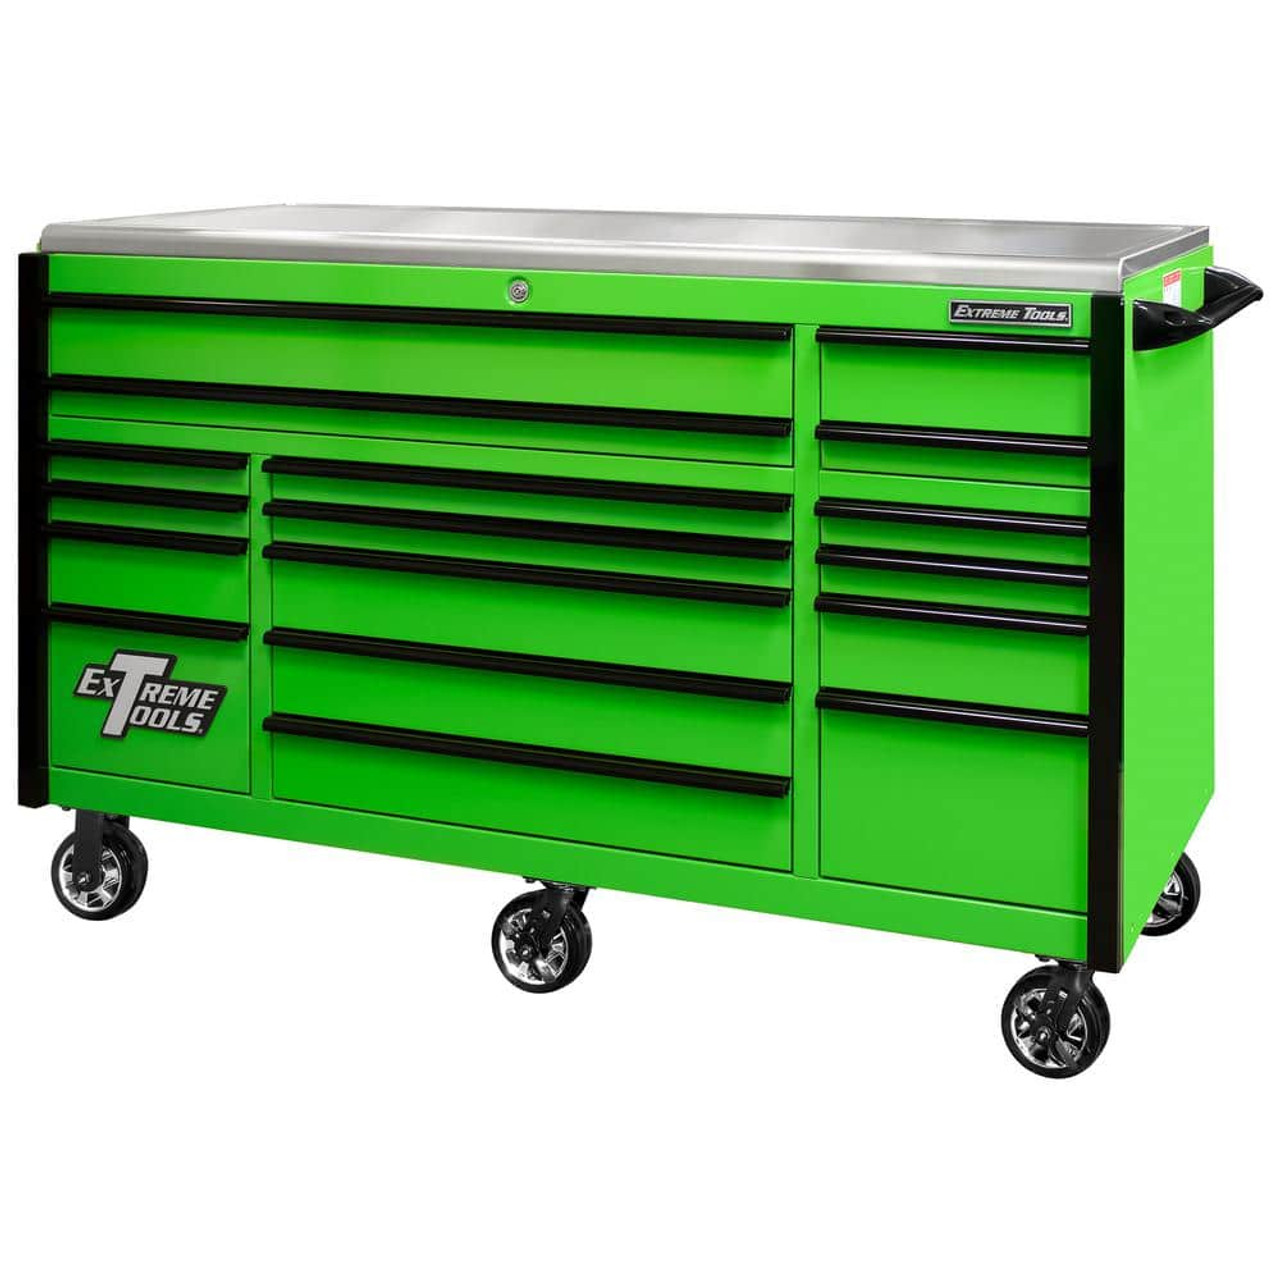 https://cdn11.bigcommerce.com/s-f4083/images/stencil/1280x1280/products/181272/276497/green-gloss-powder-coat-with-black-drawer-pulls-and-trim-extreme-tools-tool-cabinets-ex7217rcqgnbk-64_1000__23905.1671807197.jpg?c=2